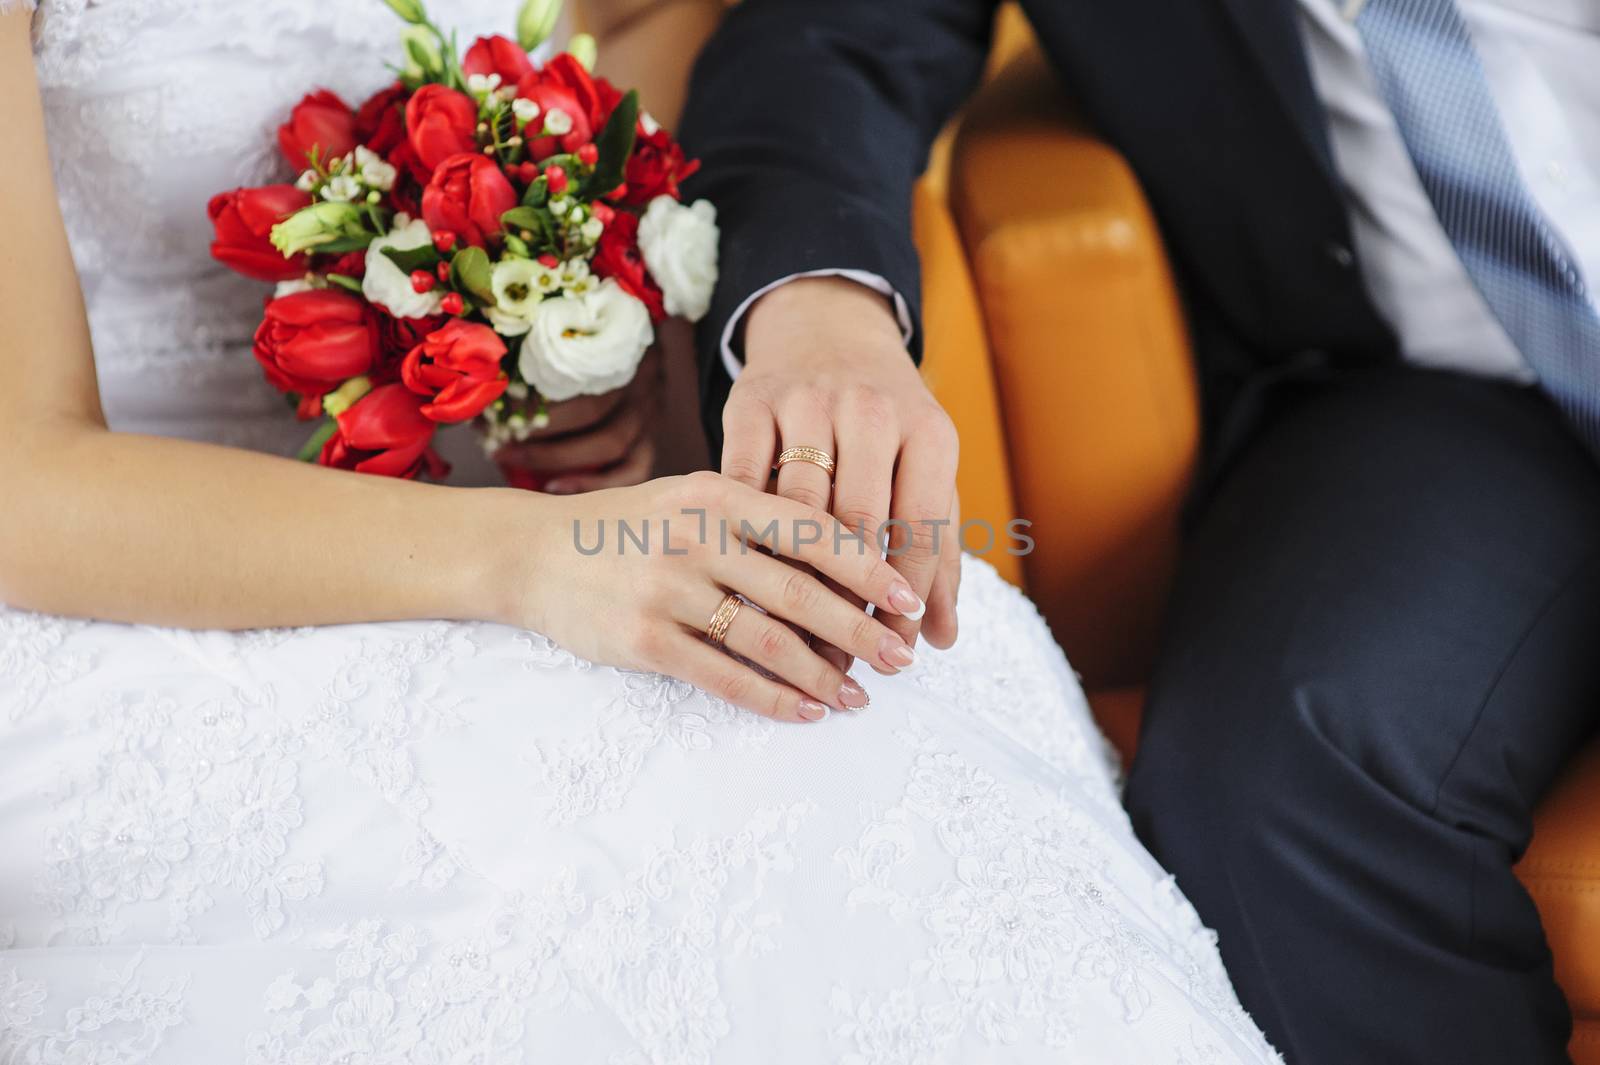 Hands and rings on wedding bouquet. wedding theme background 